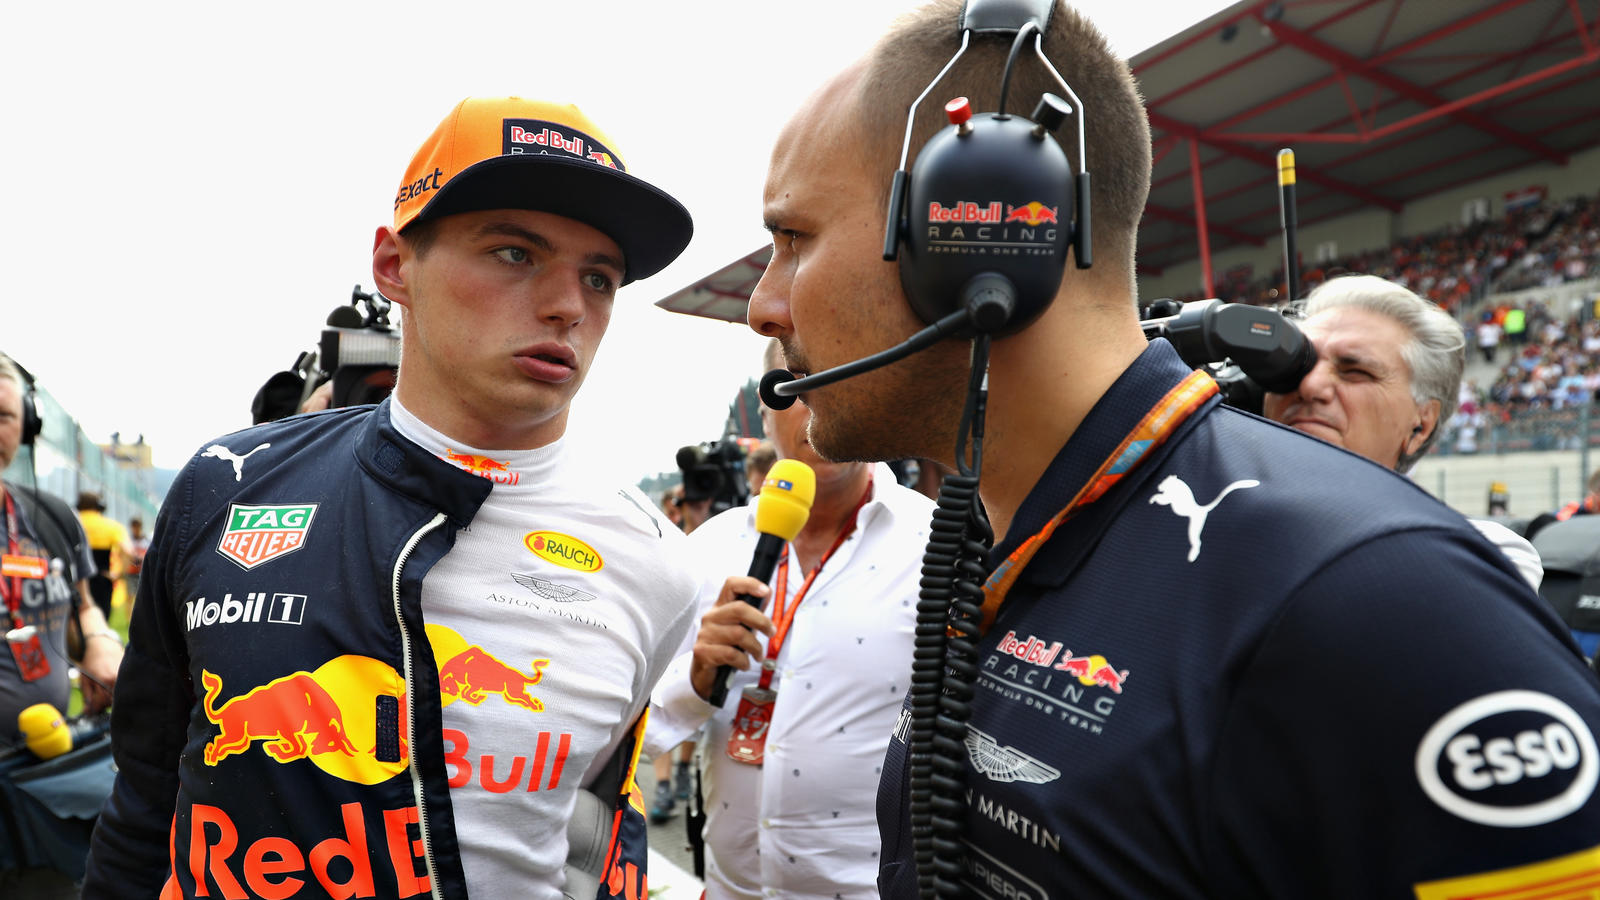 SPA, BELGIUM - AUGUST 27:  Max Verstappen of Netherlands and Red Bull Racing talks with race engineer Gianpiero Lambiase on the grid before the Formula One Grand Prix of Belgium at Circuit de Spa-Francorchamps on August 27, 2017 in Spa, Belgium.  (Ph